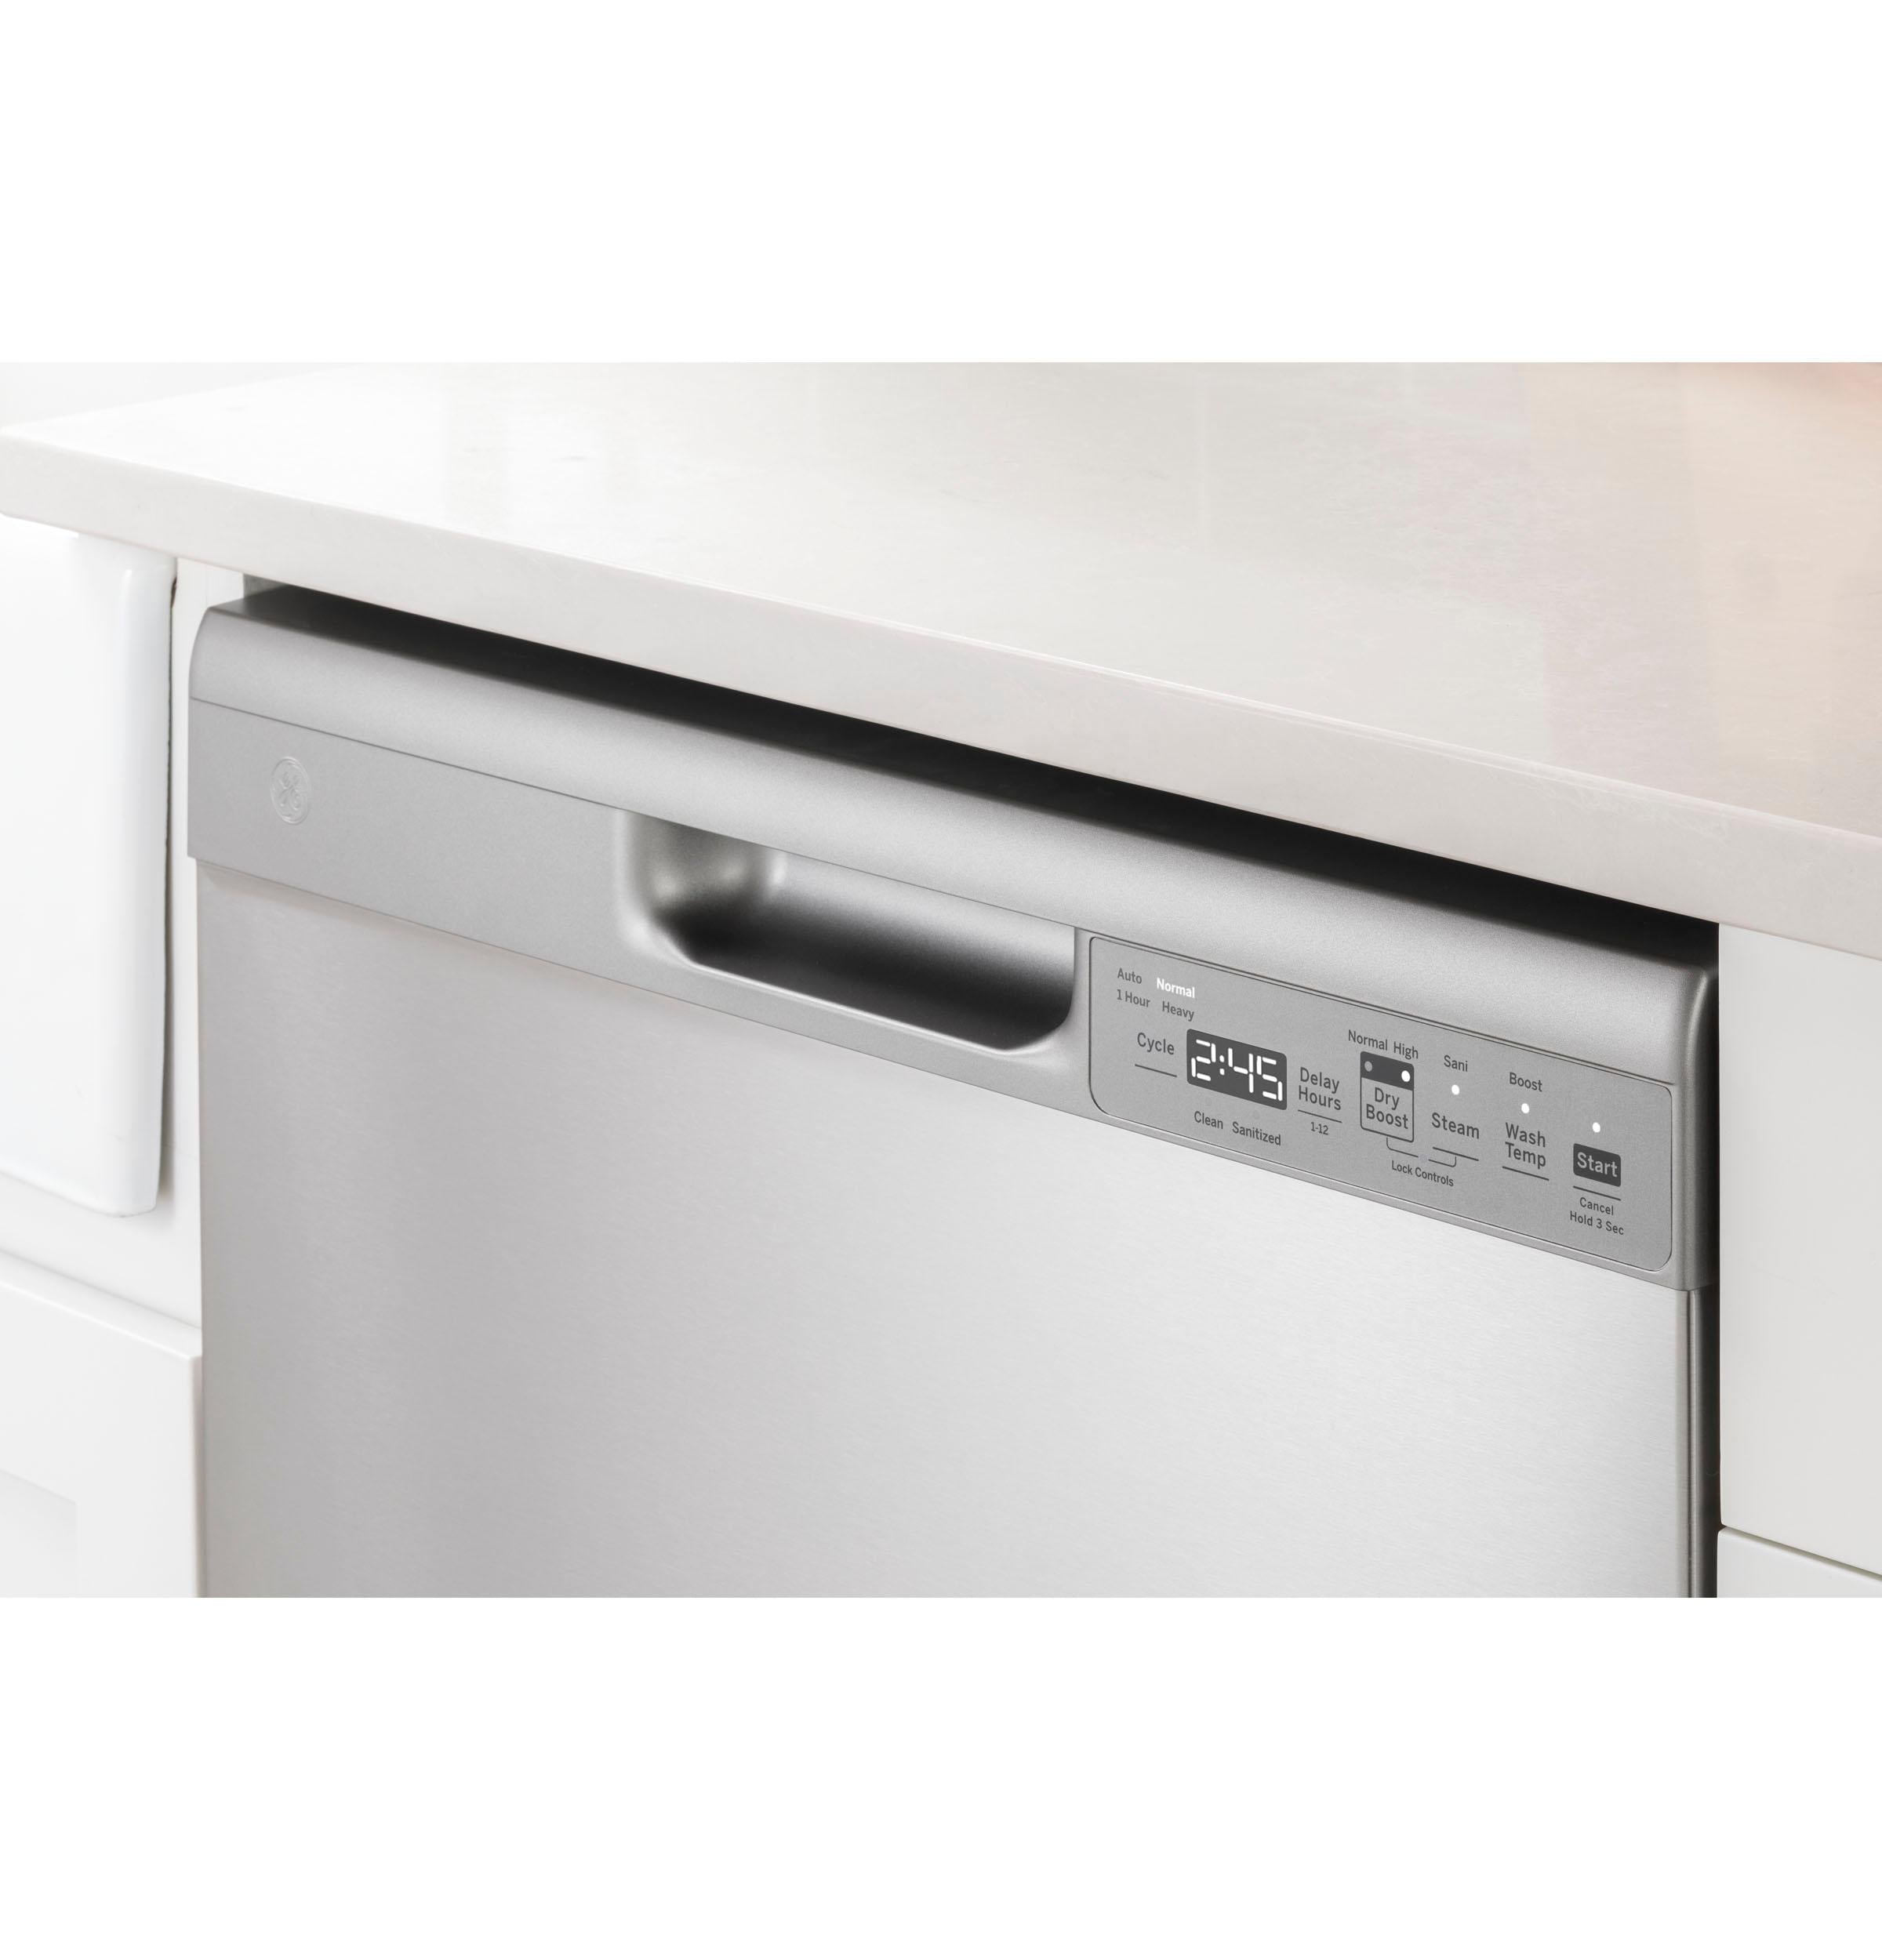 GE® ENERGY STAR® Front Control with Plastic Interior Dishwasher with Sanitize Cycle